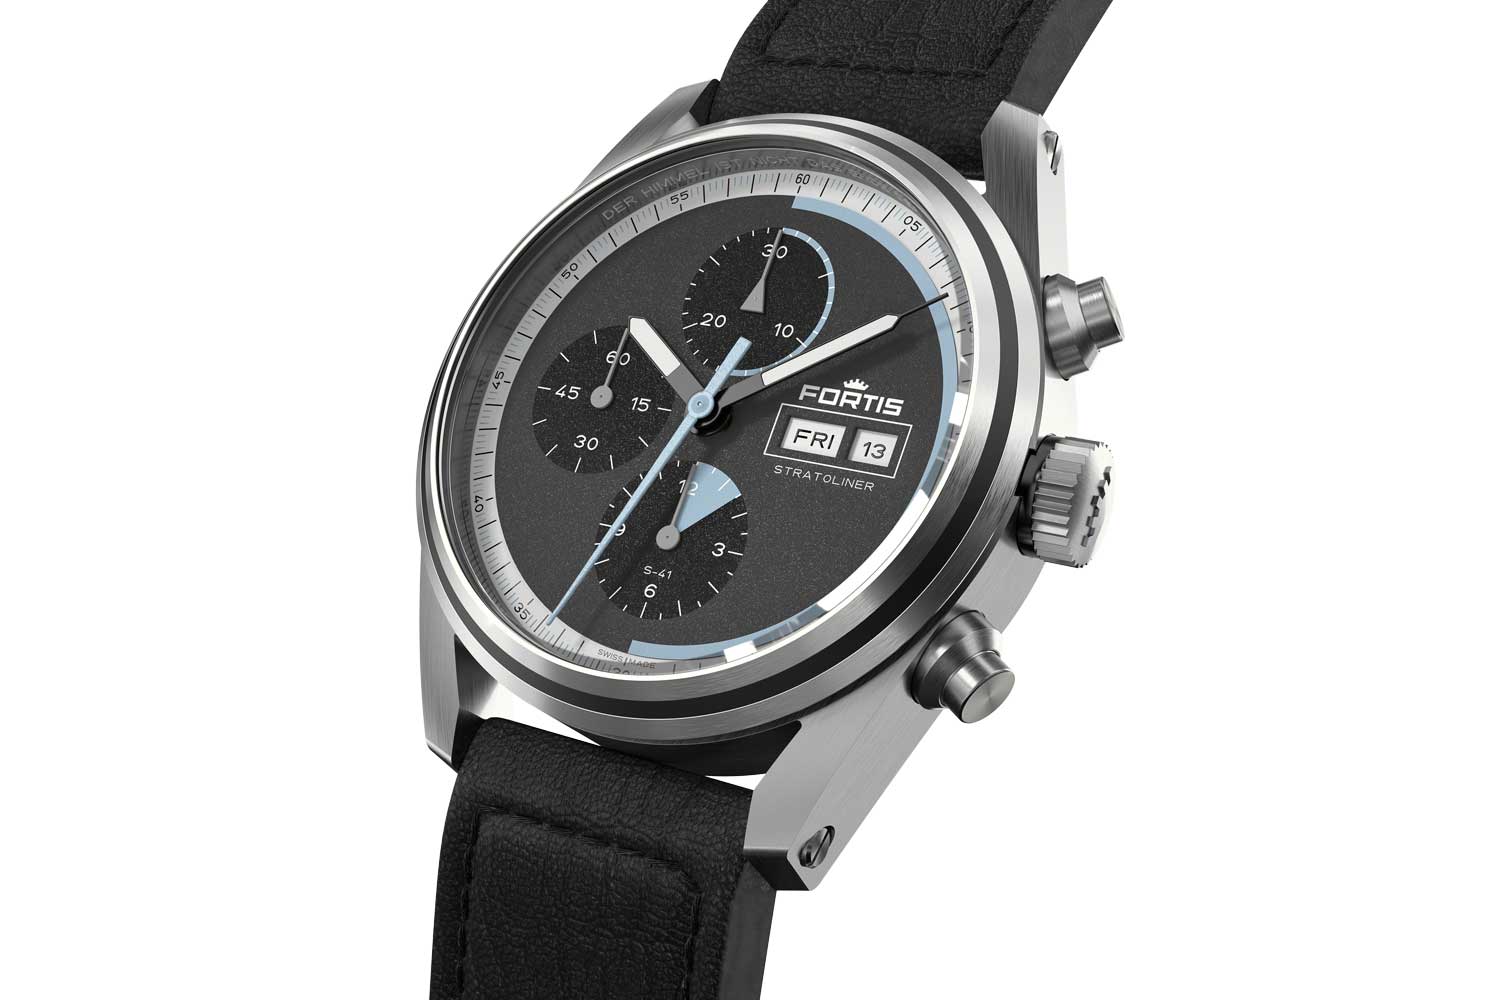 Cosmic Gray goes for a bolder finish with a dark-gray dial and black subdials